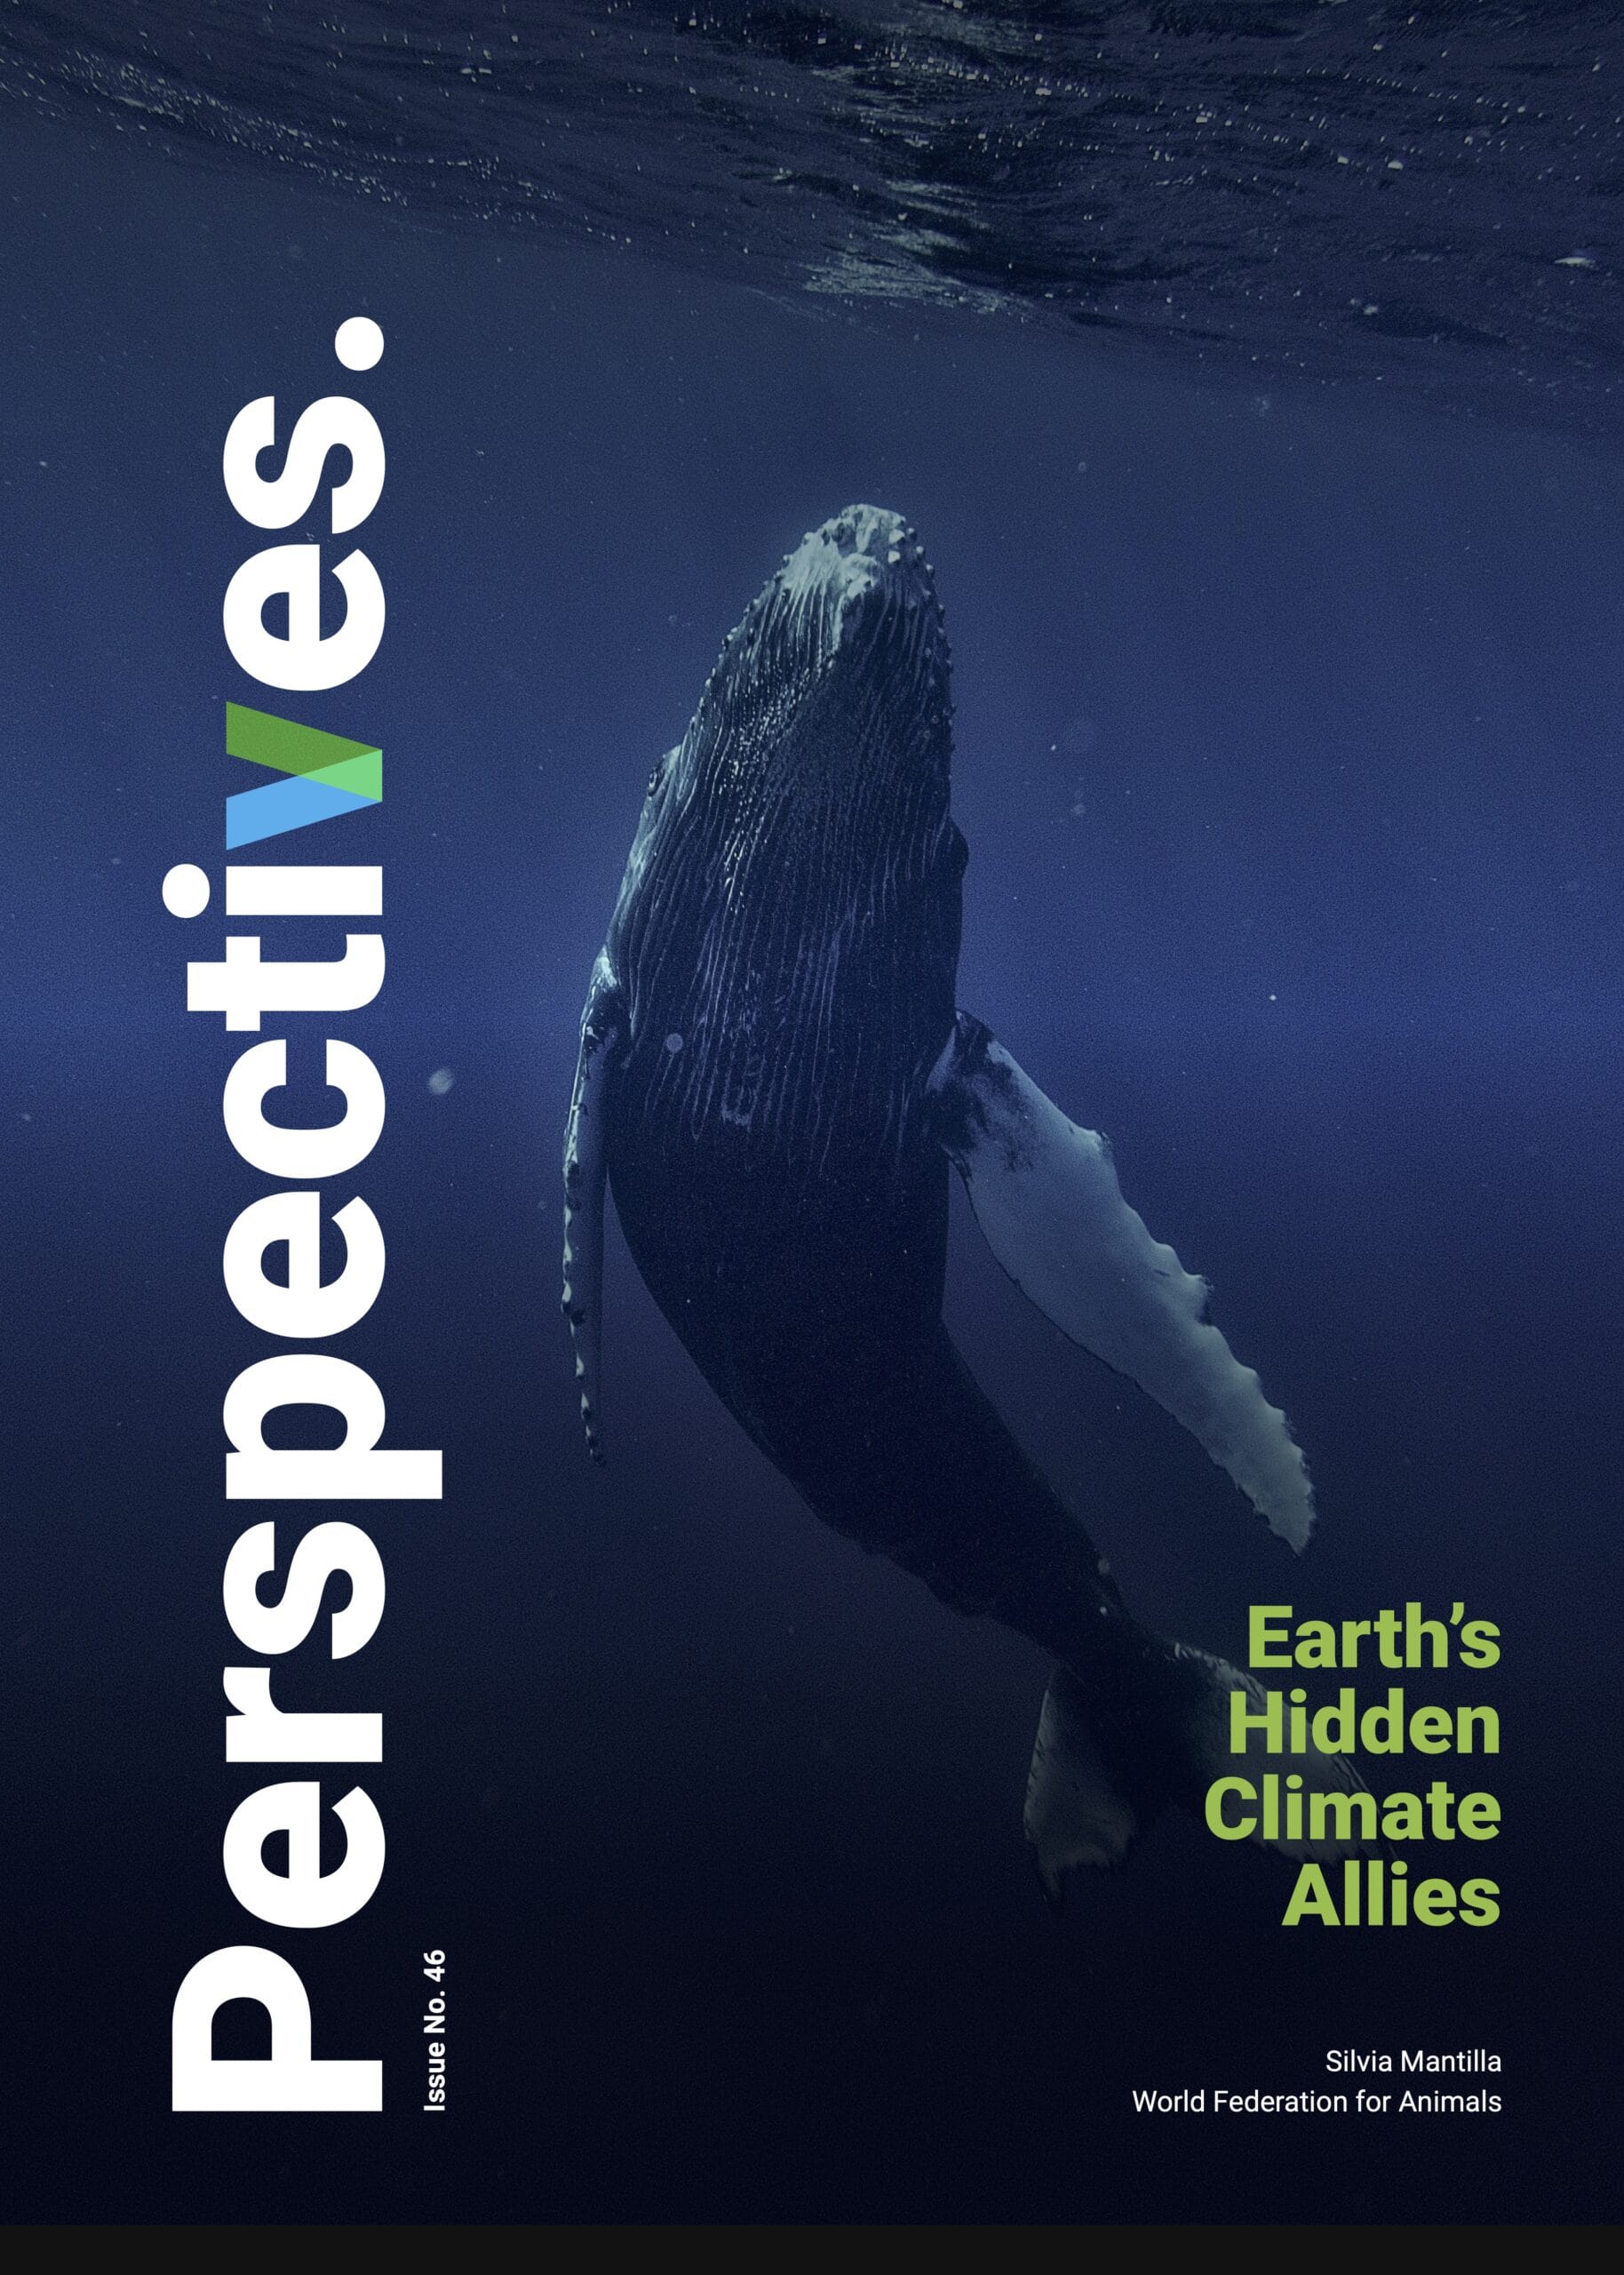 Issue46 Earth's Climate Allies 2024 02 09 V5 (1)